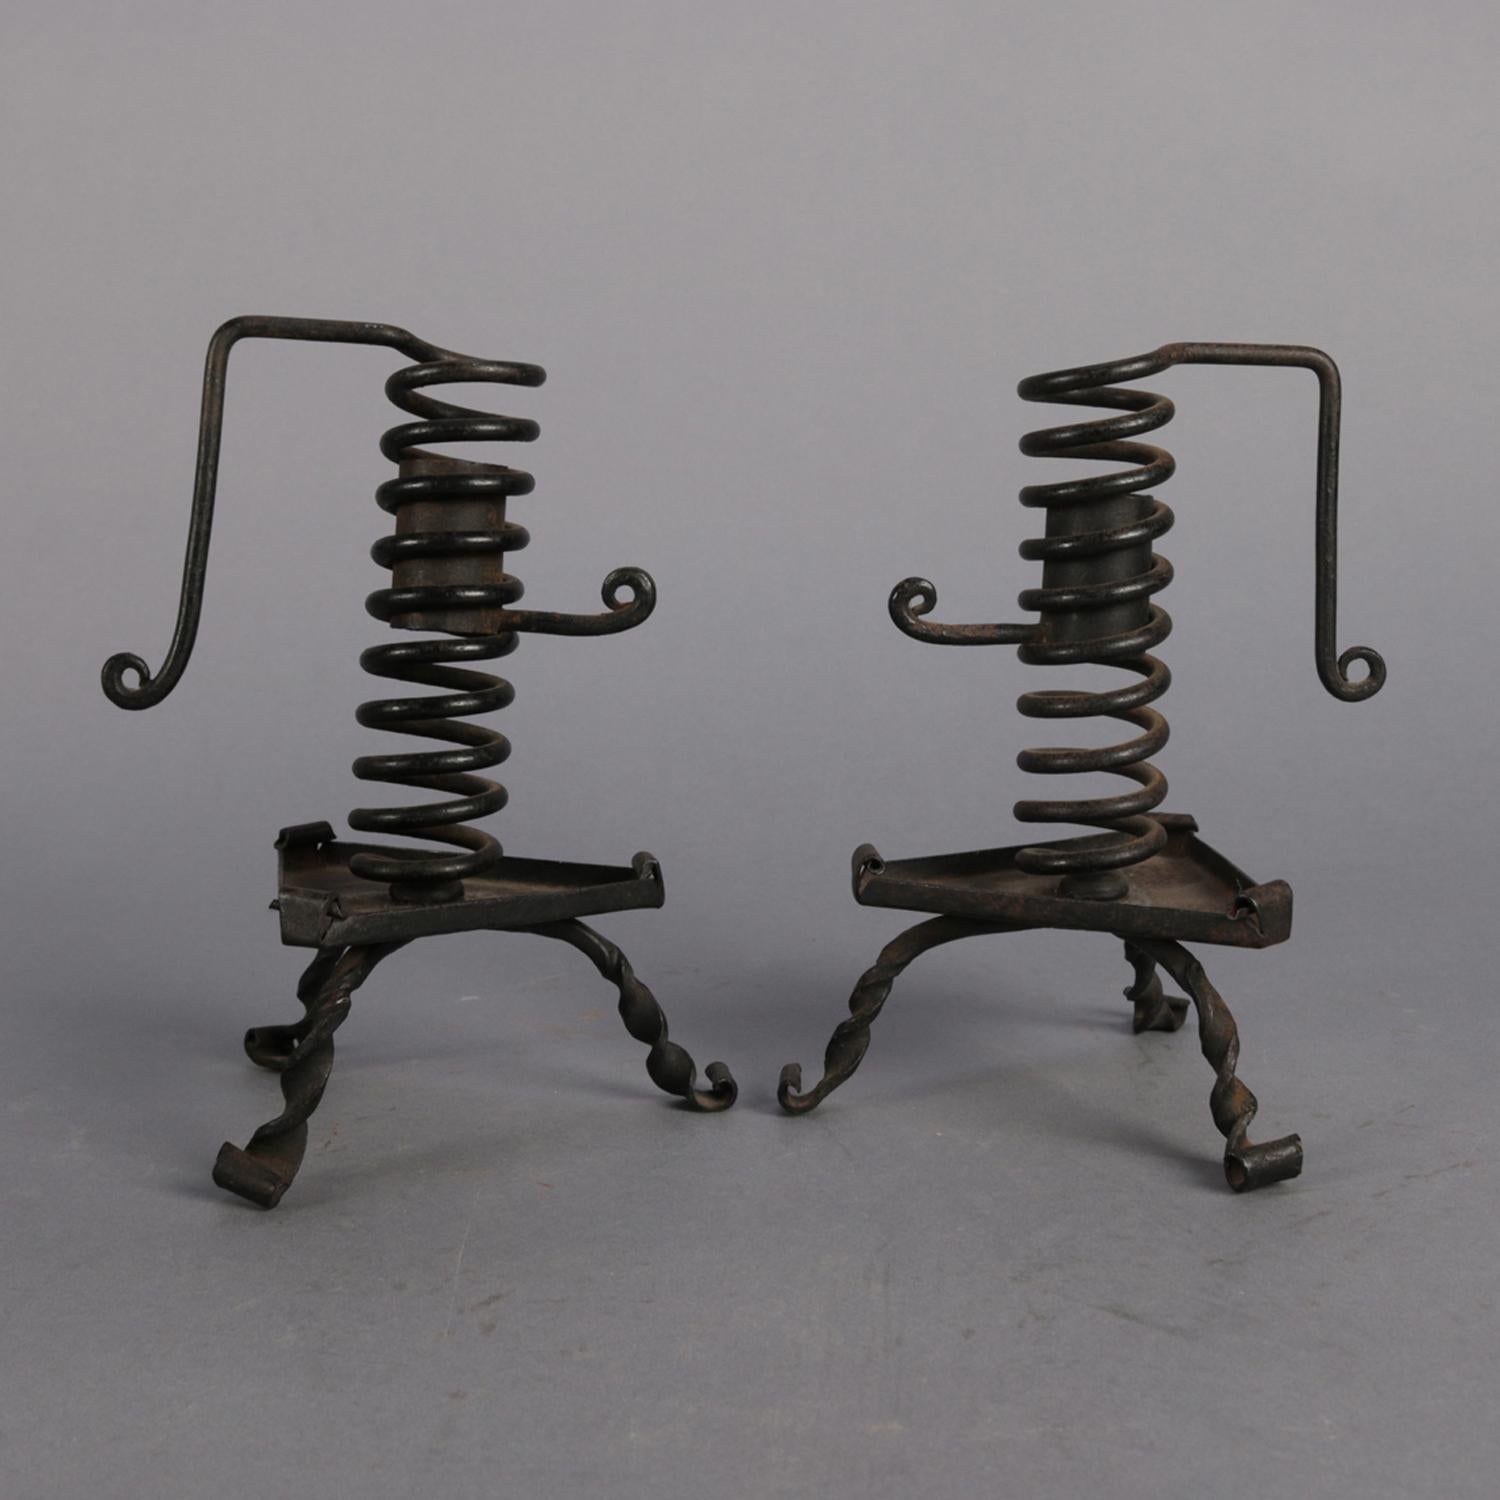 Pair of antique hand held courting candle sticks feature spiral and footed wrought iron construction with scrolled handles and height adjusters, circa 1830

Measures: 7